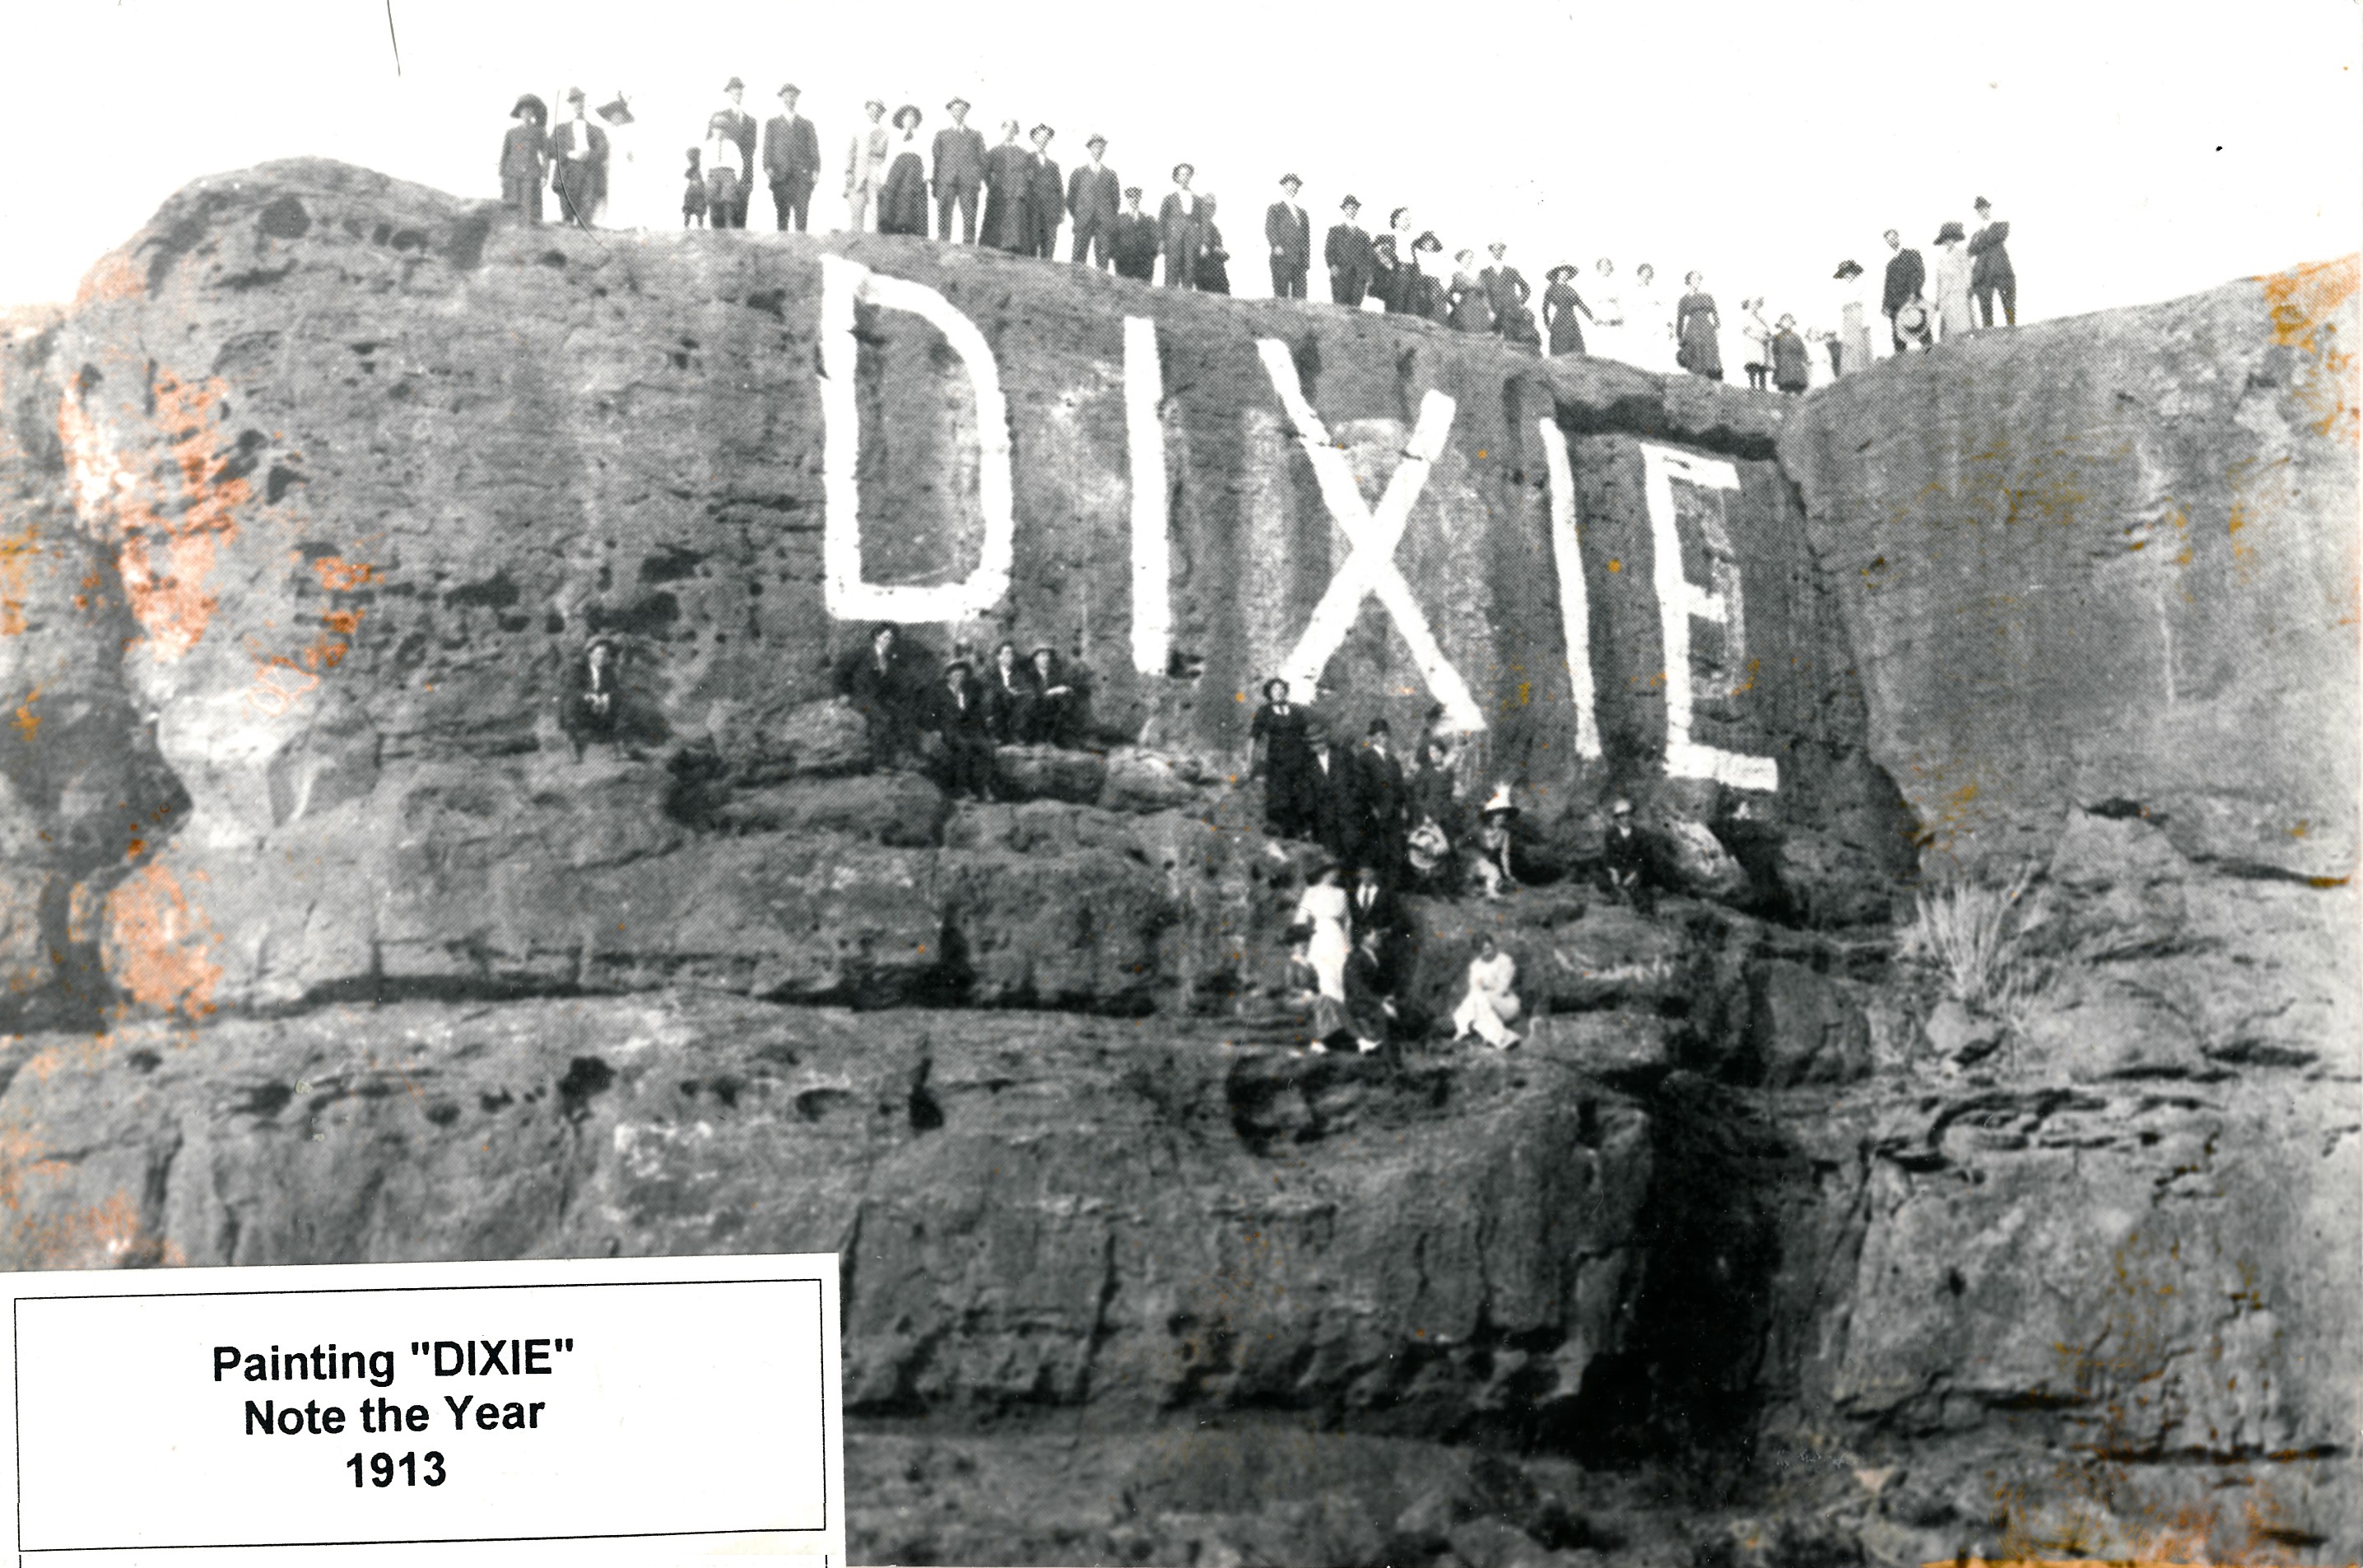 People standing on the Dixie Sugarloaf